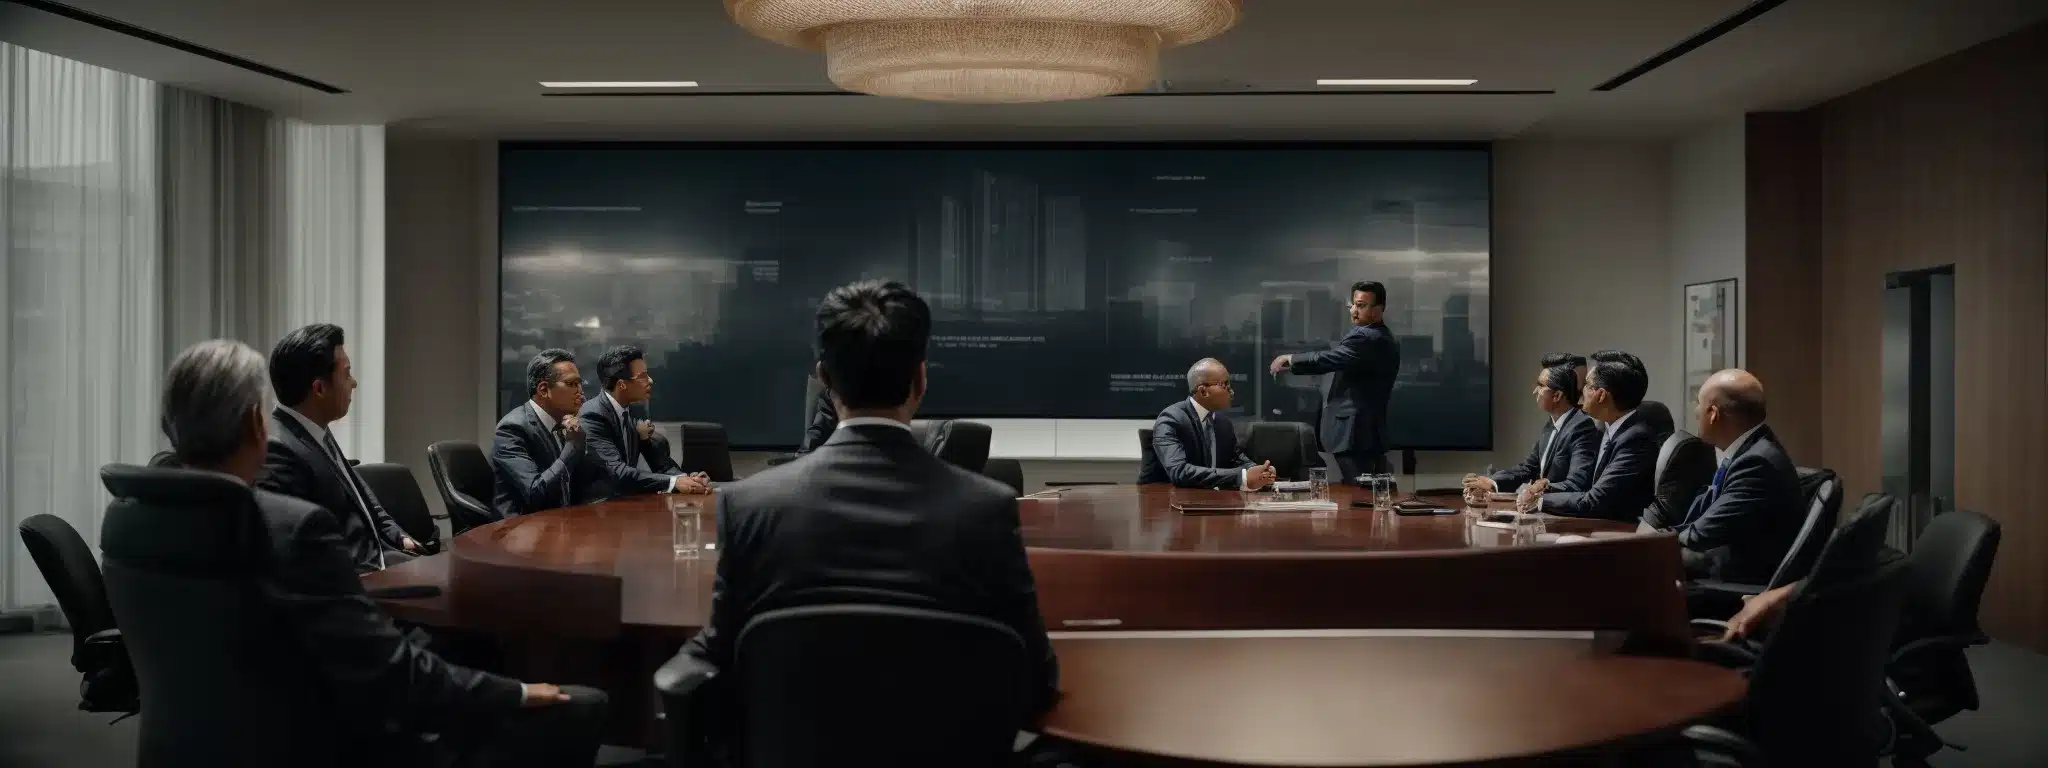 An Executive Team Strategizes Around A Conference Table, Aligning Their Brand Vision With The Corporate Identity Depicted On The Central Screen.